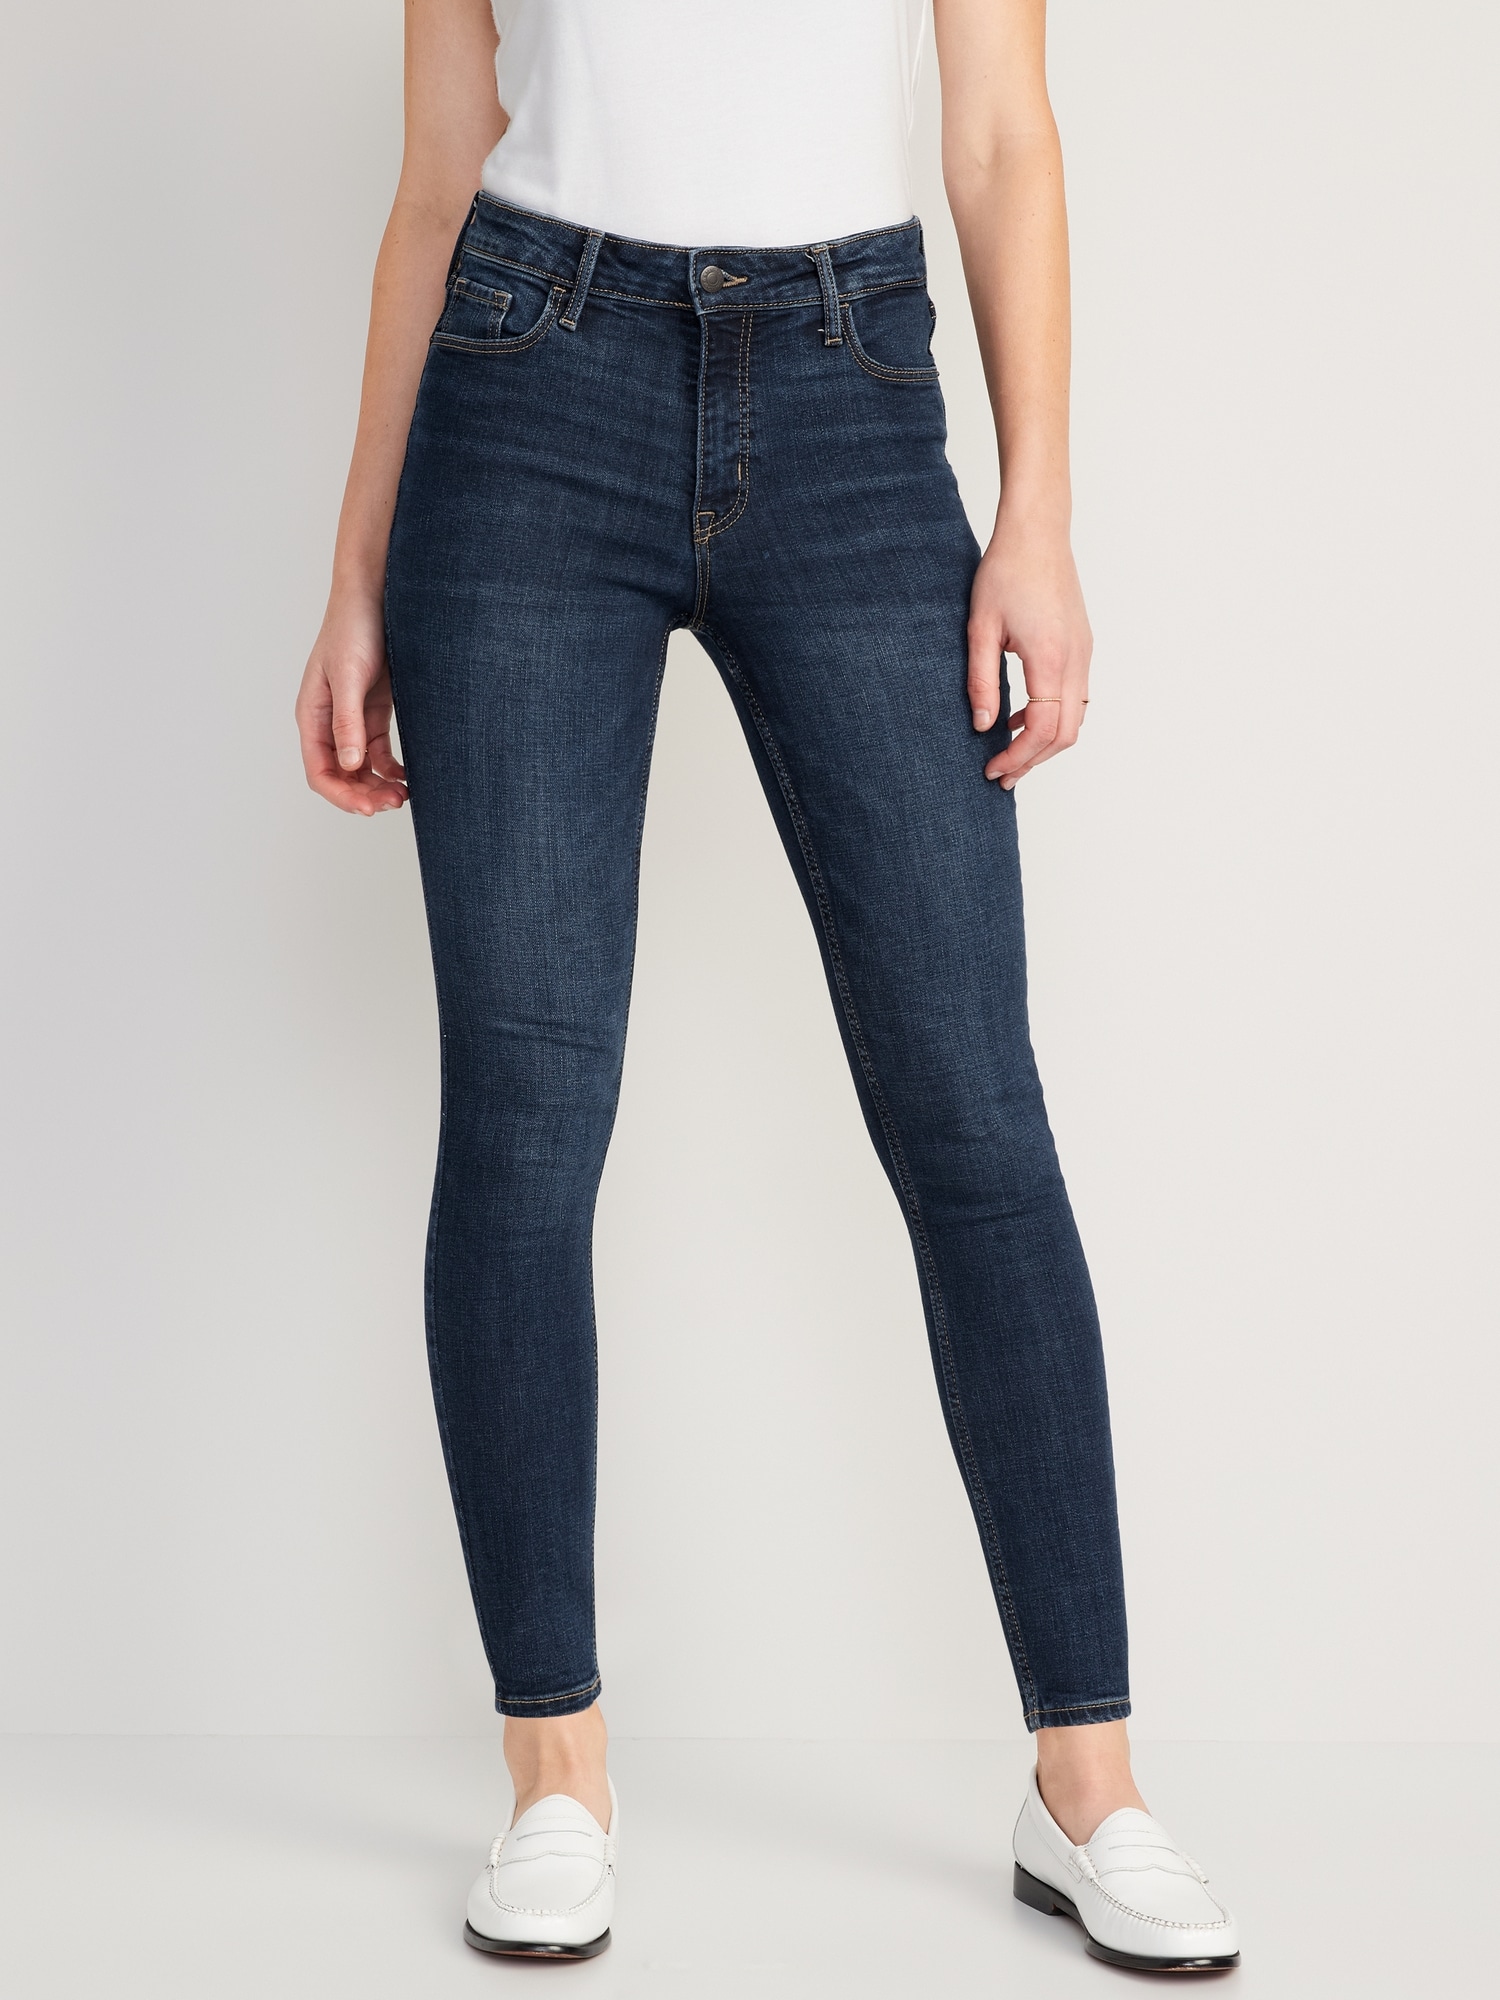 Old Navy Women's High-Waisted Rockstar Super-Skinny Jeans - - Size 4